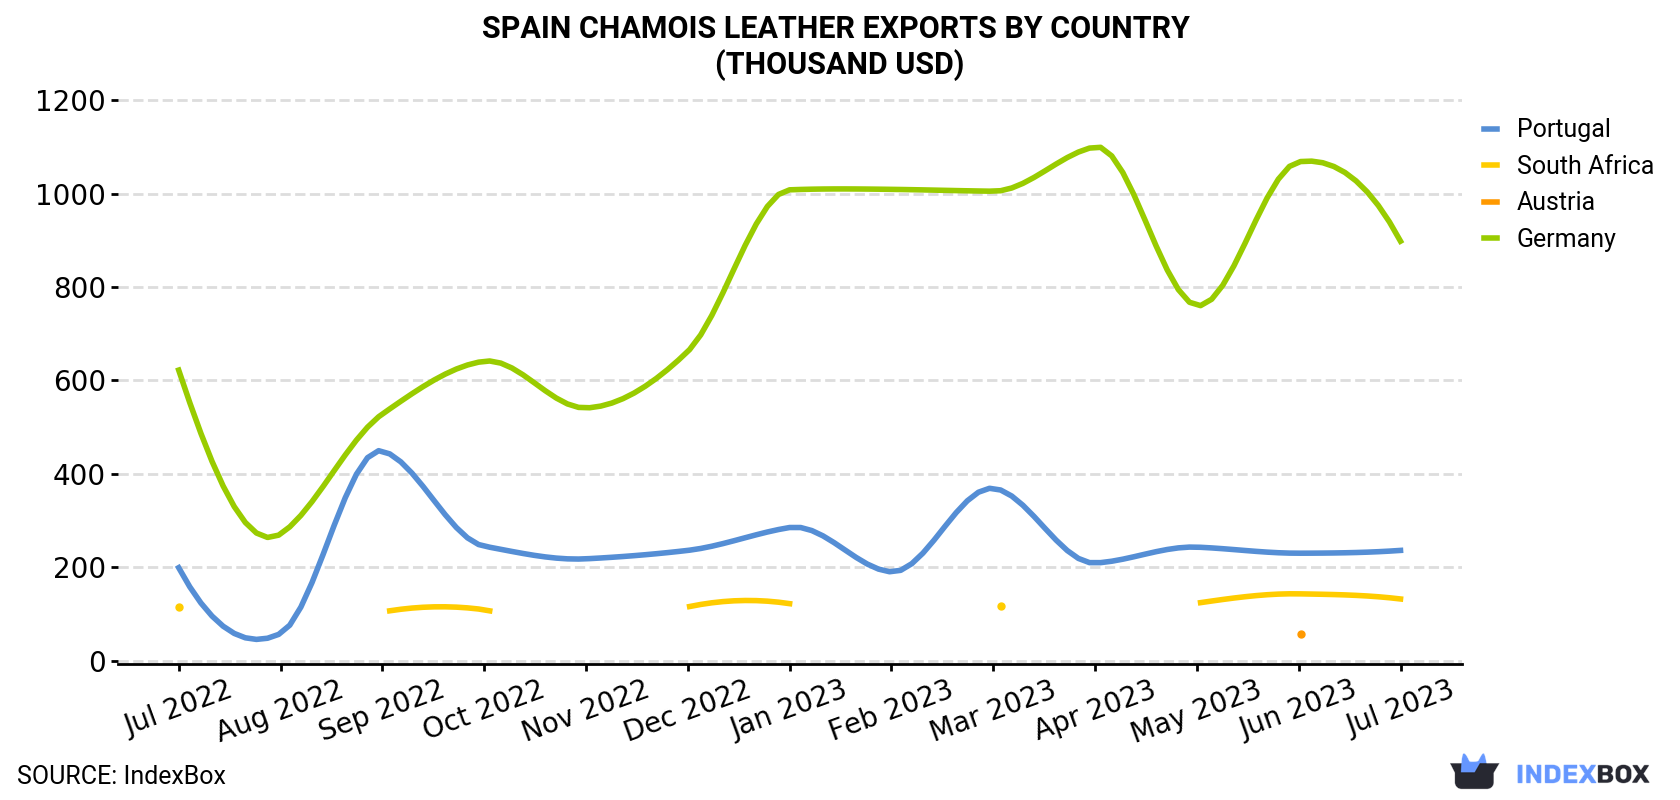 Spain Chamois Leather Exports By Country (Thousand USD)